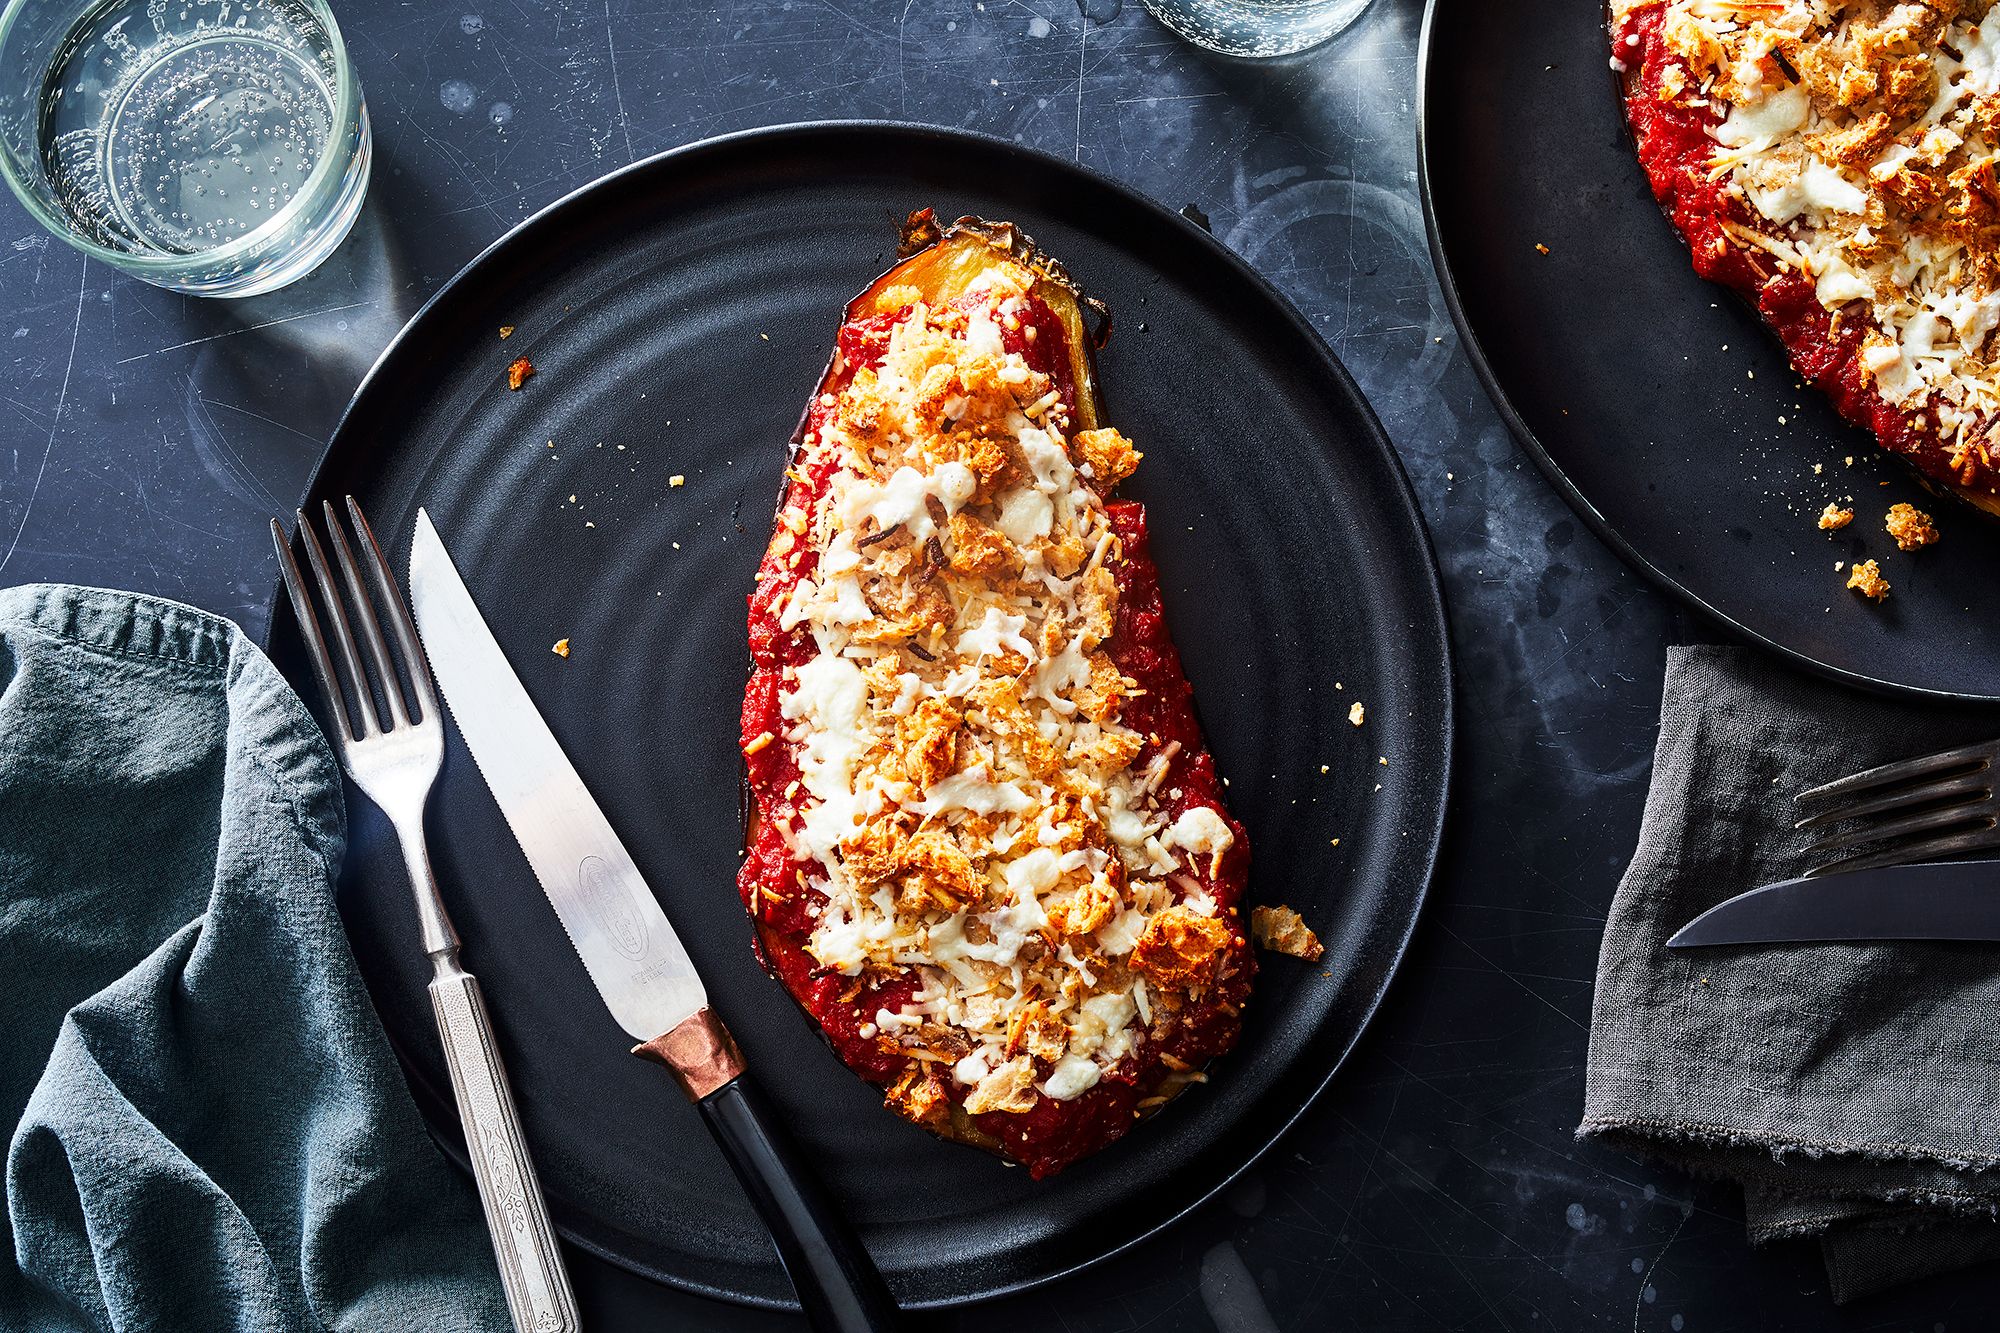 5-Ingredient Eggplant Parm Skips the Fuss, Keeps the Cheese